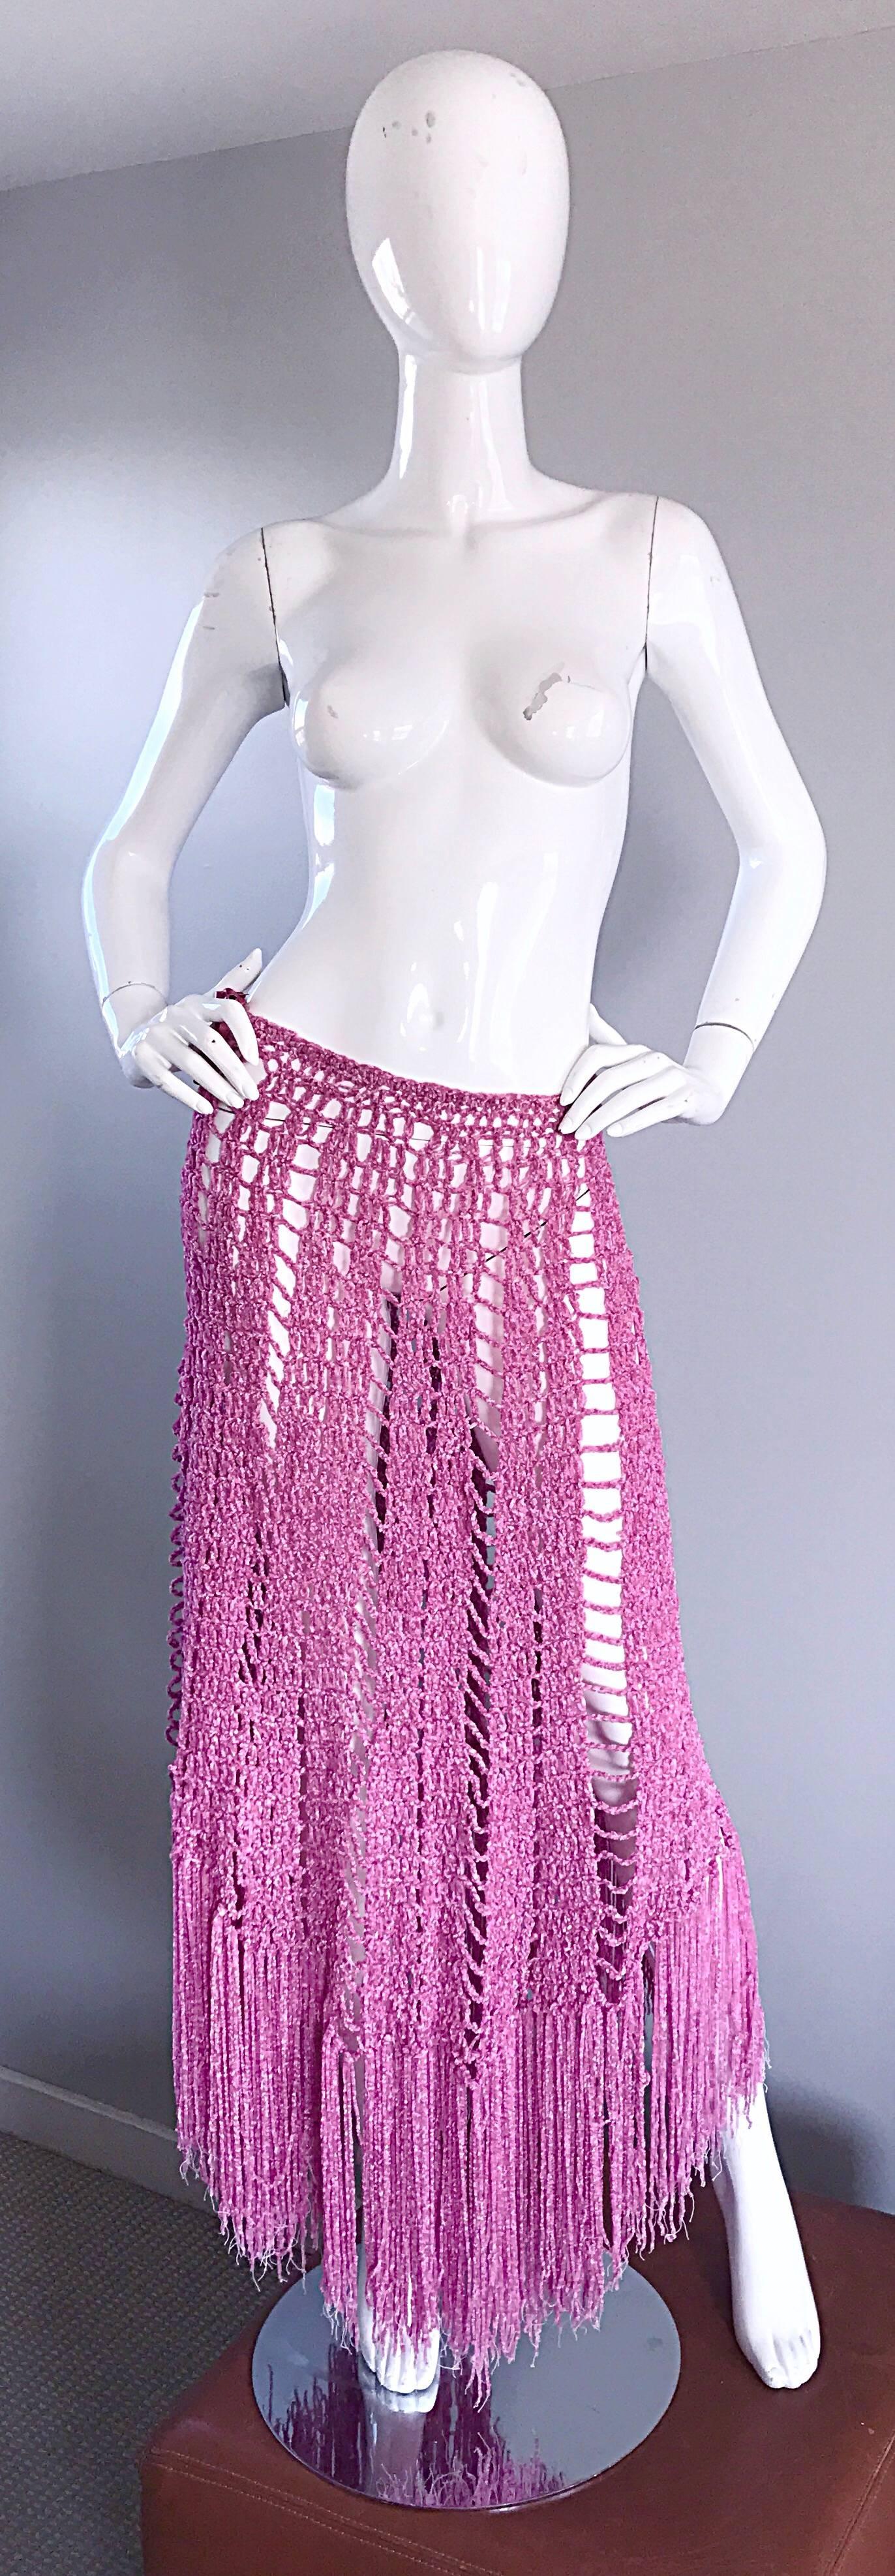 Incredible vintage 70s deadstock JOSEPH MAGNIN pink hand crochet Italian skirt, dress OR poncho / cape! Fringe hem, and side silk tie at waist to adjust size. The perfect piece! Also great as a swimsuit cover up! In great unworn condition. Brand new